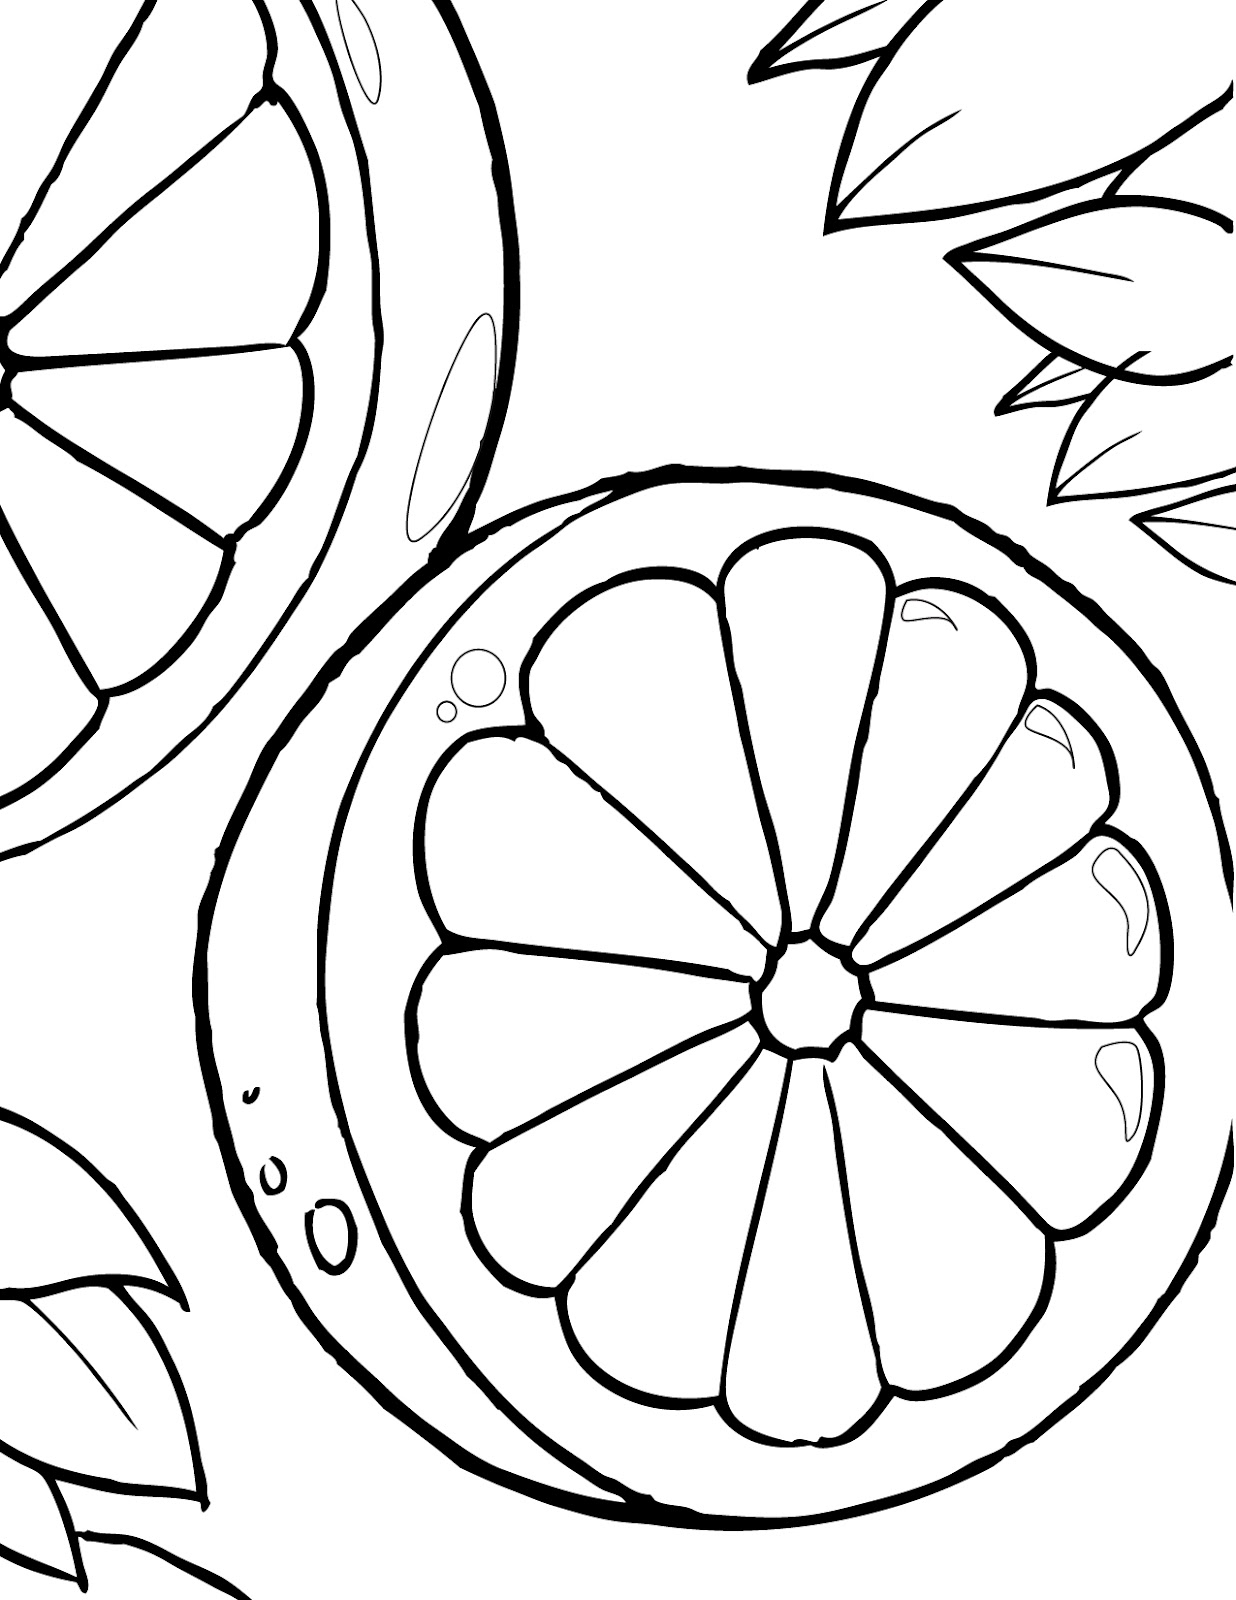  Printable Coloring Pages   5